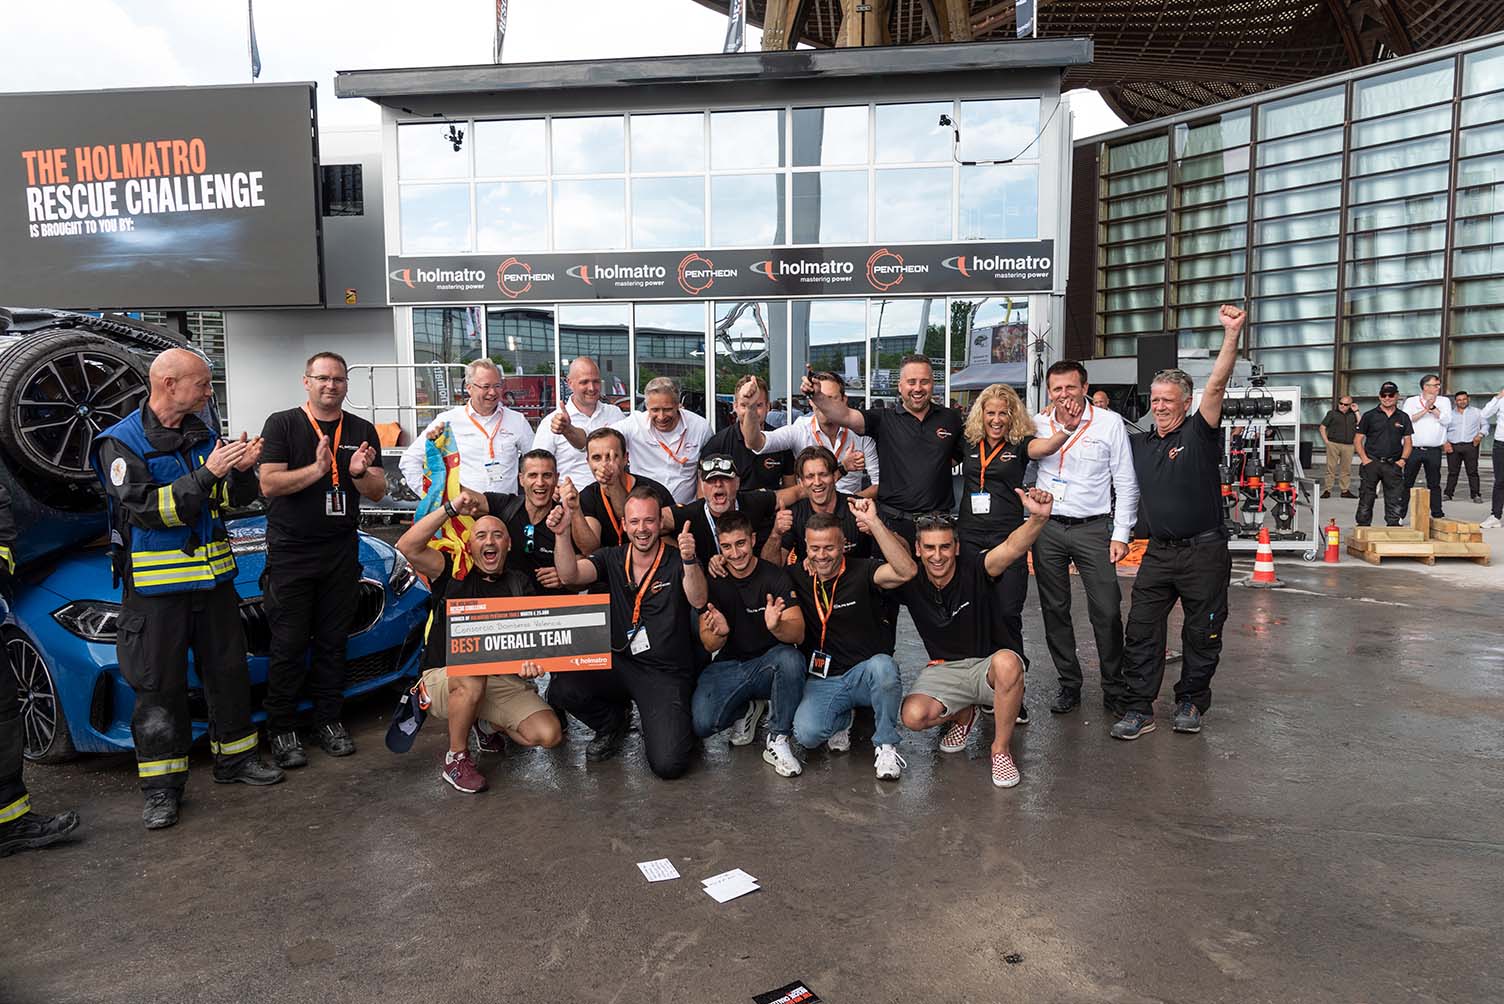 Team picture of the Best Overall Team from the Holmatro Rescue Challenge 2022: Consorcio Bomberos Valencia